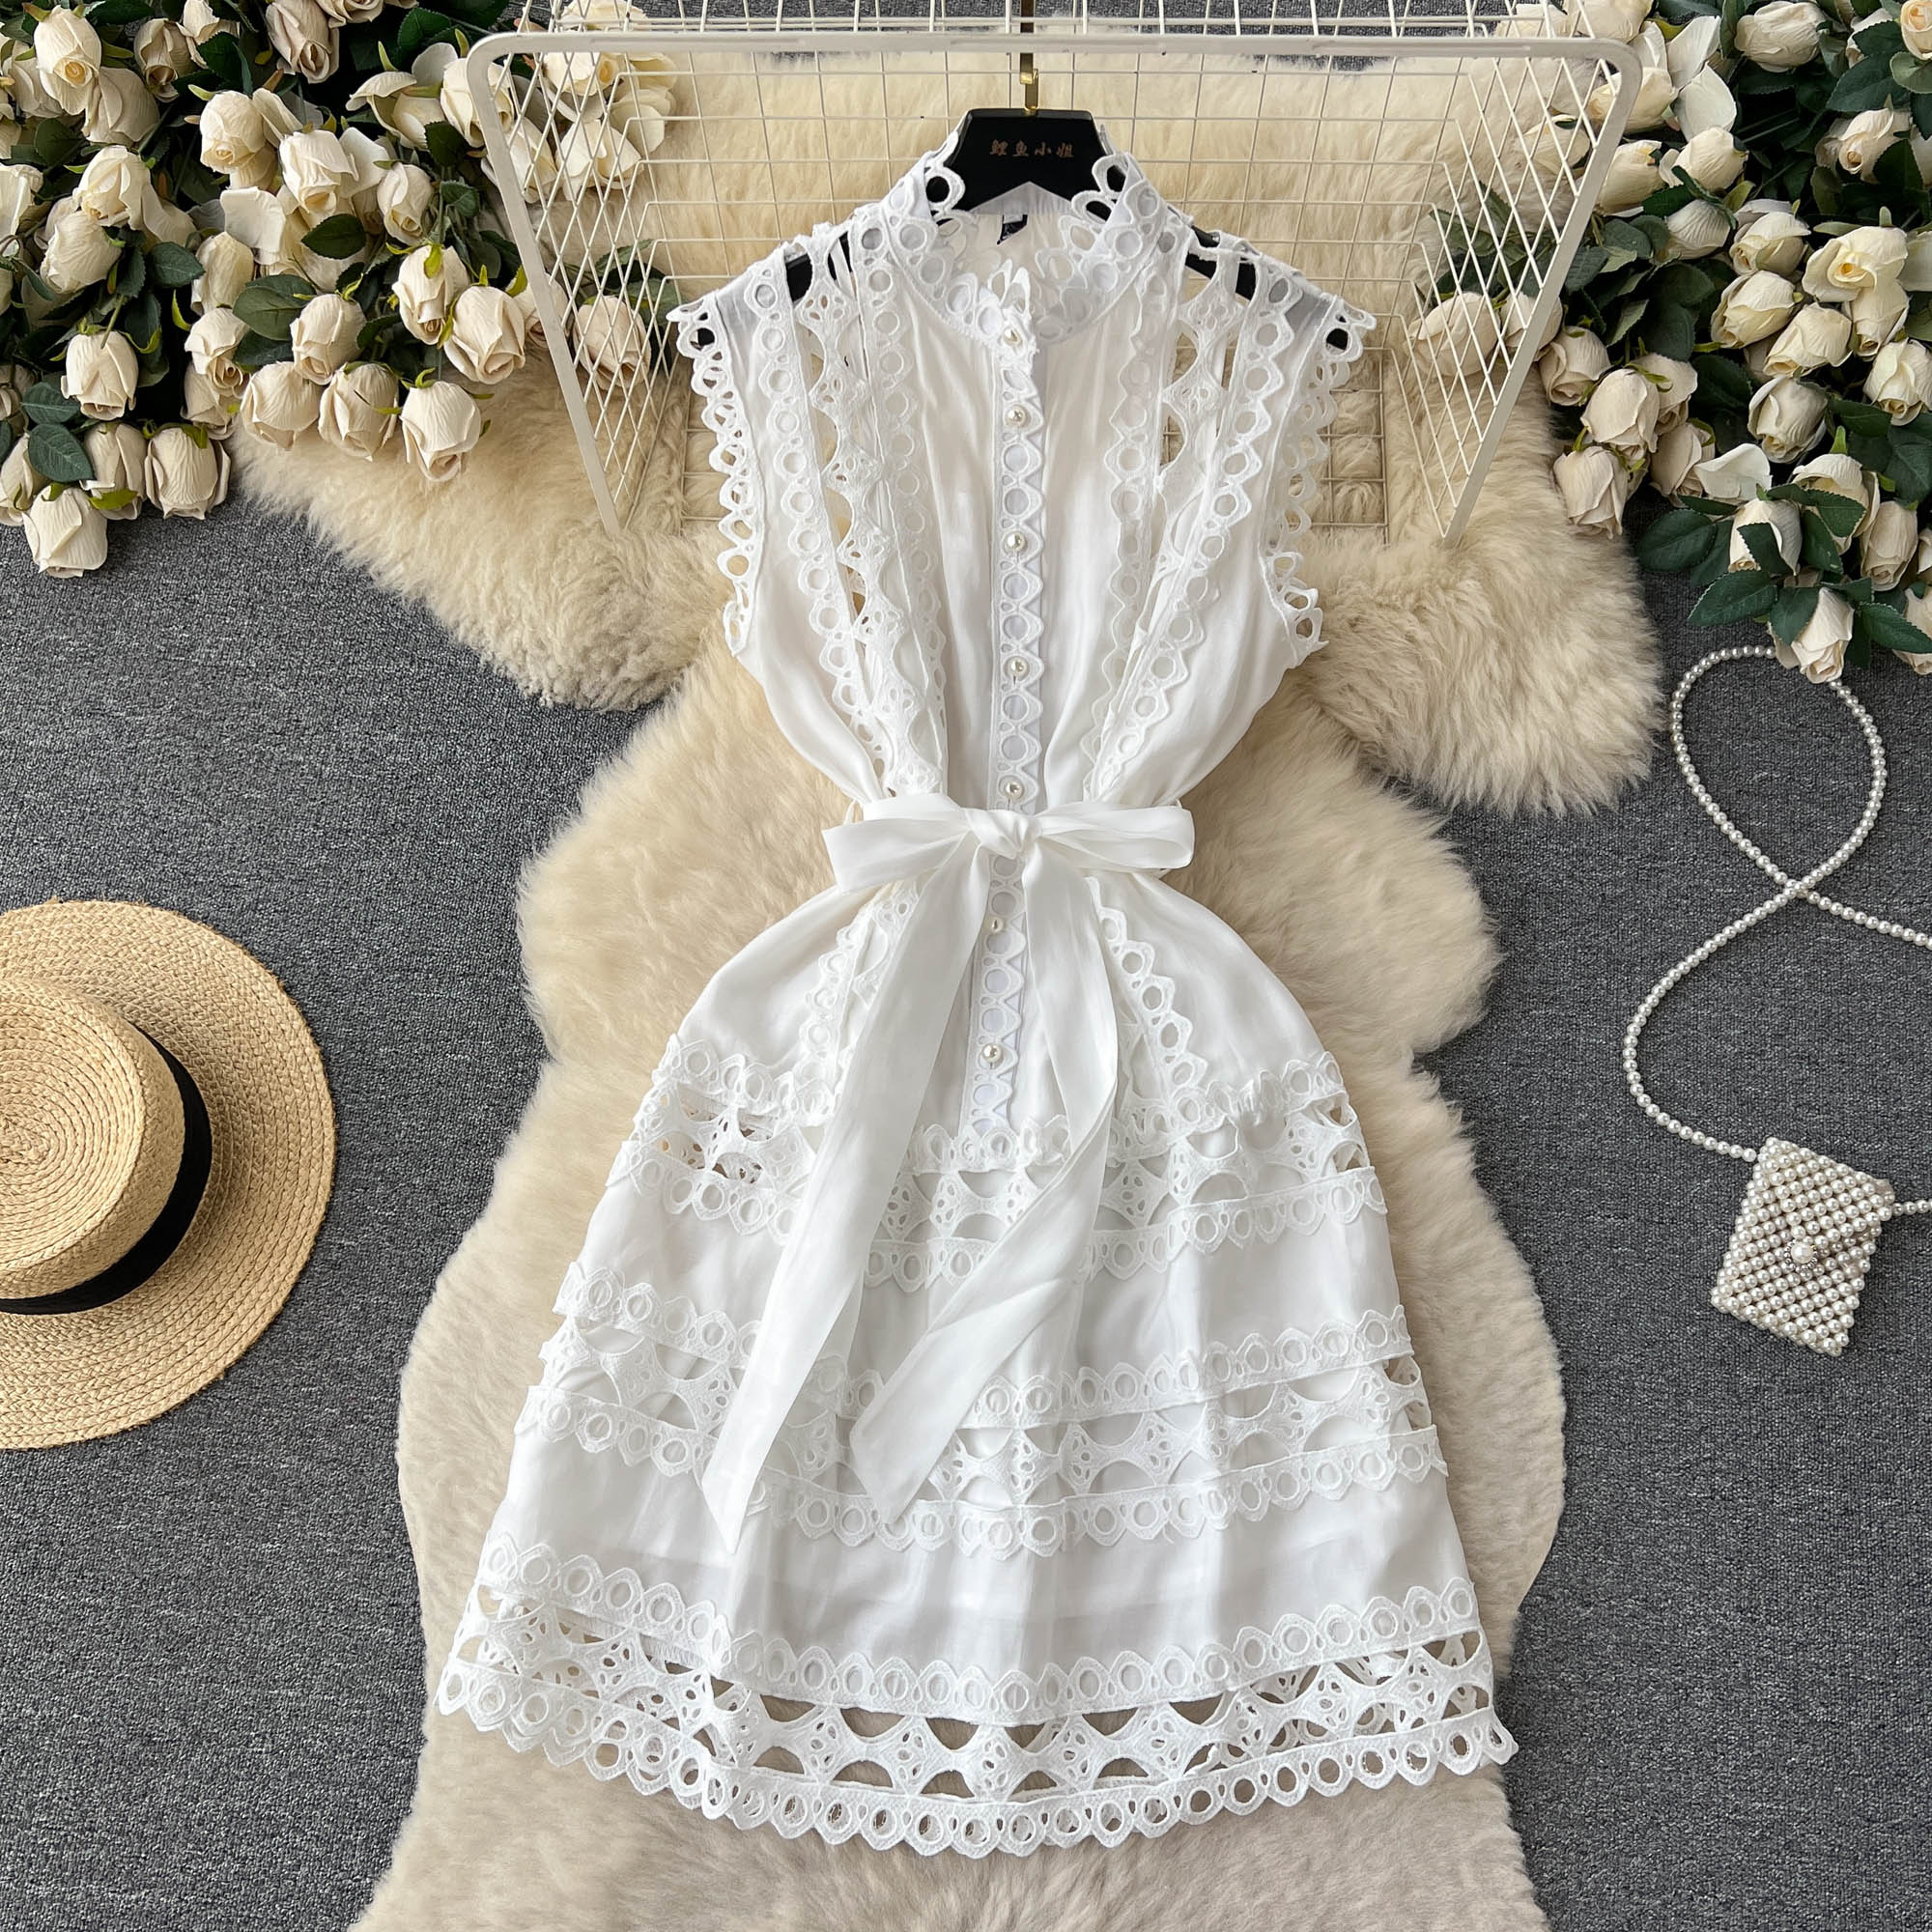 Casual Dresses Vintage Hollow Out Lace Floral Embroidery Dress Summer Autumn Women Sleeveless Sashes Short Dresses Runway Vestidos248o